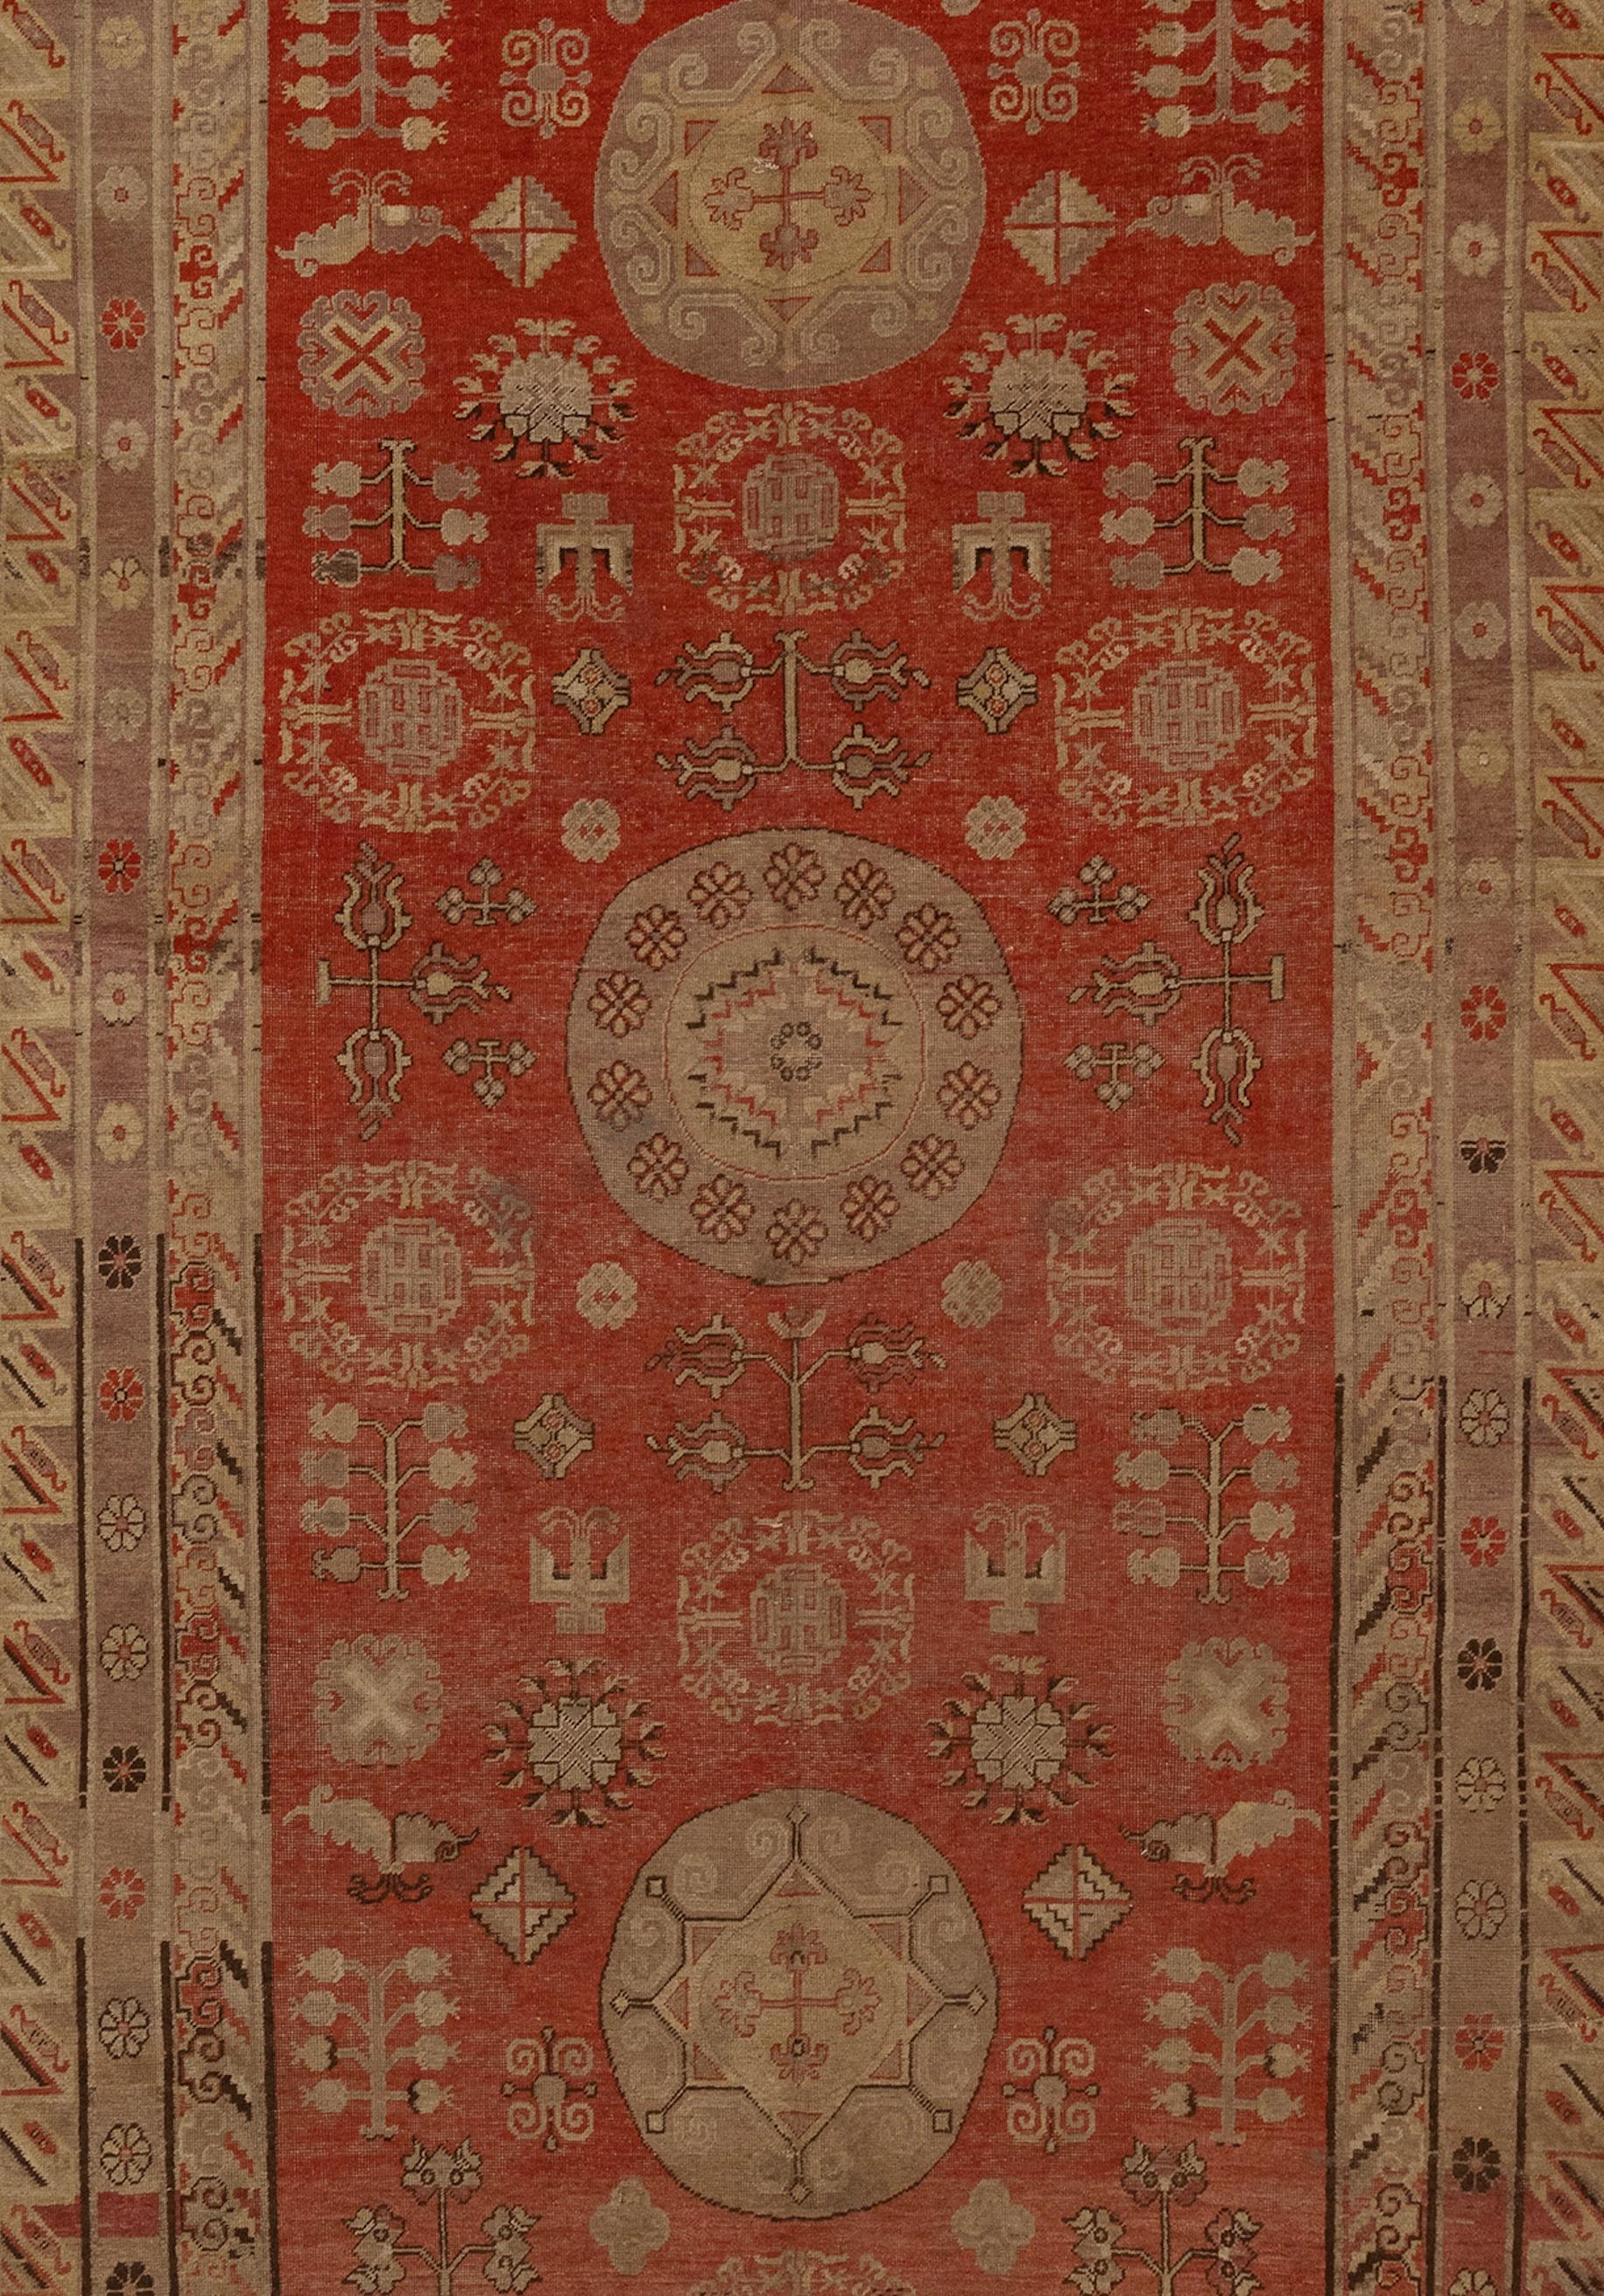 Antique Khotan area rug in soft colors circa 1880's in good condition.